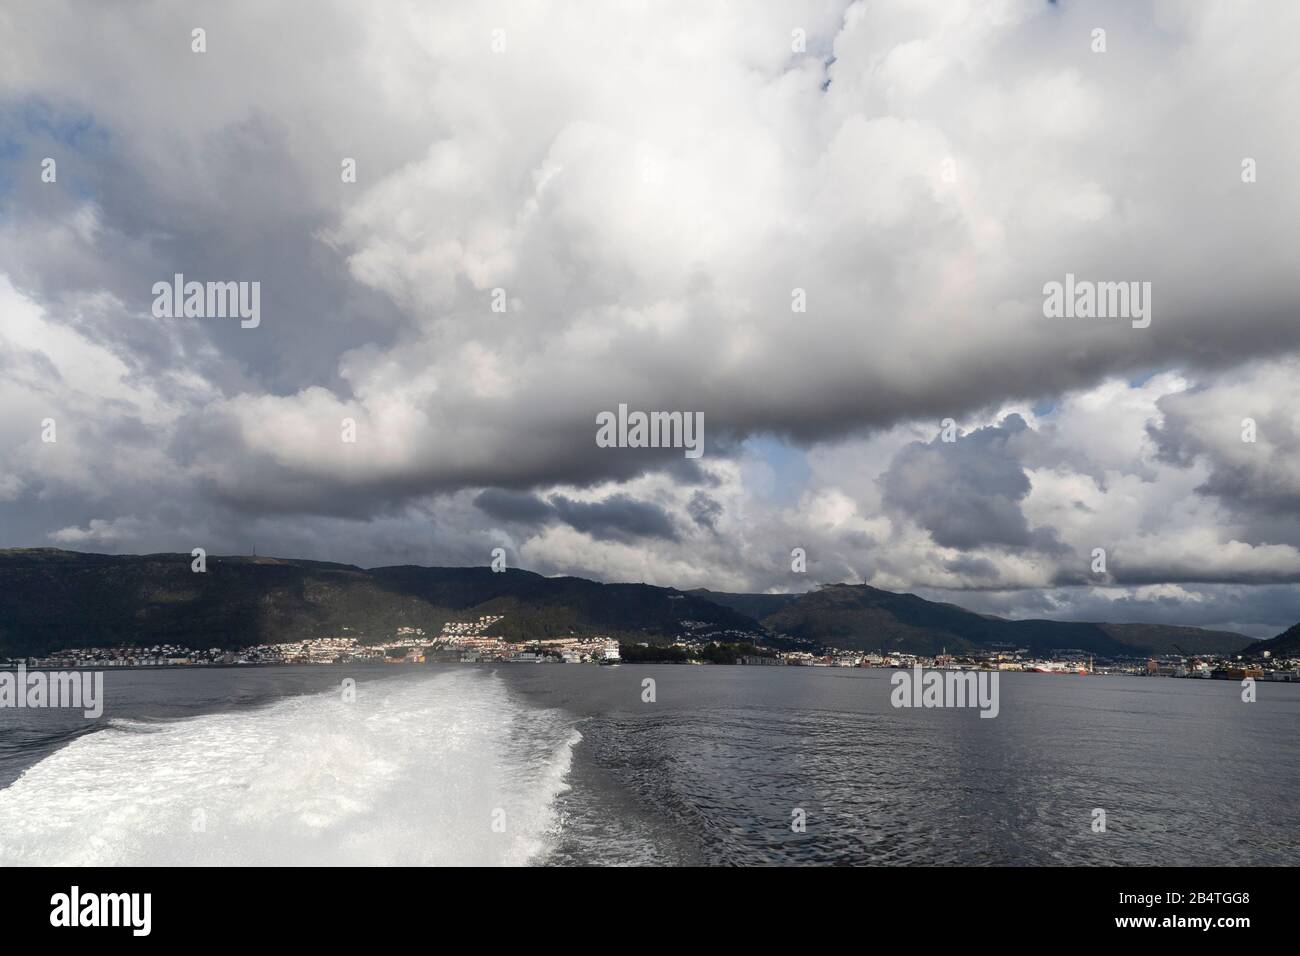 Heavy clouds over Byfjorden and city of Bergen, Norway. View from a high speed passenger vessel. Stock Photo